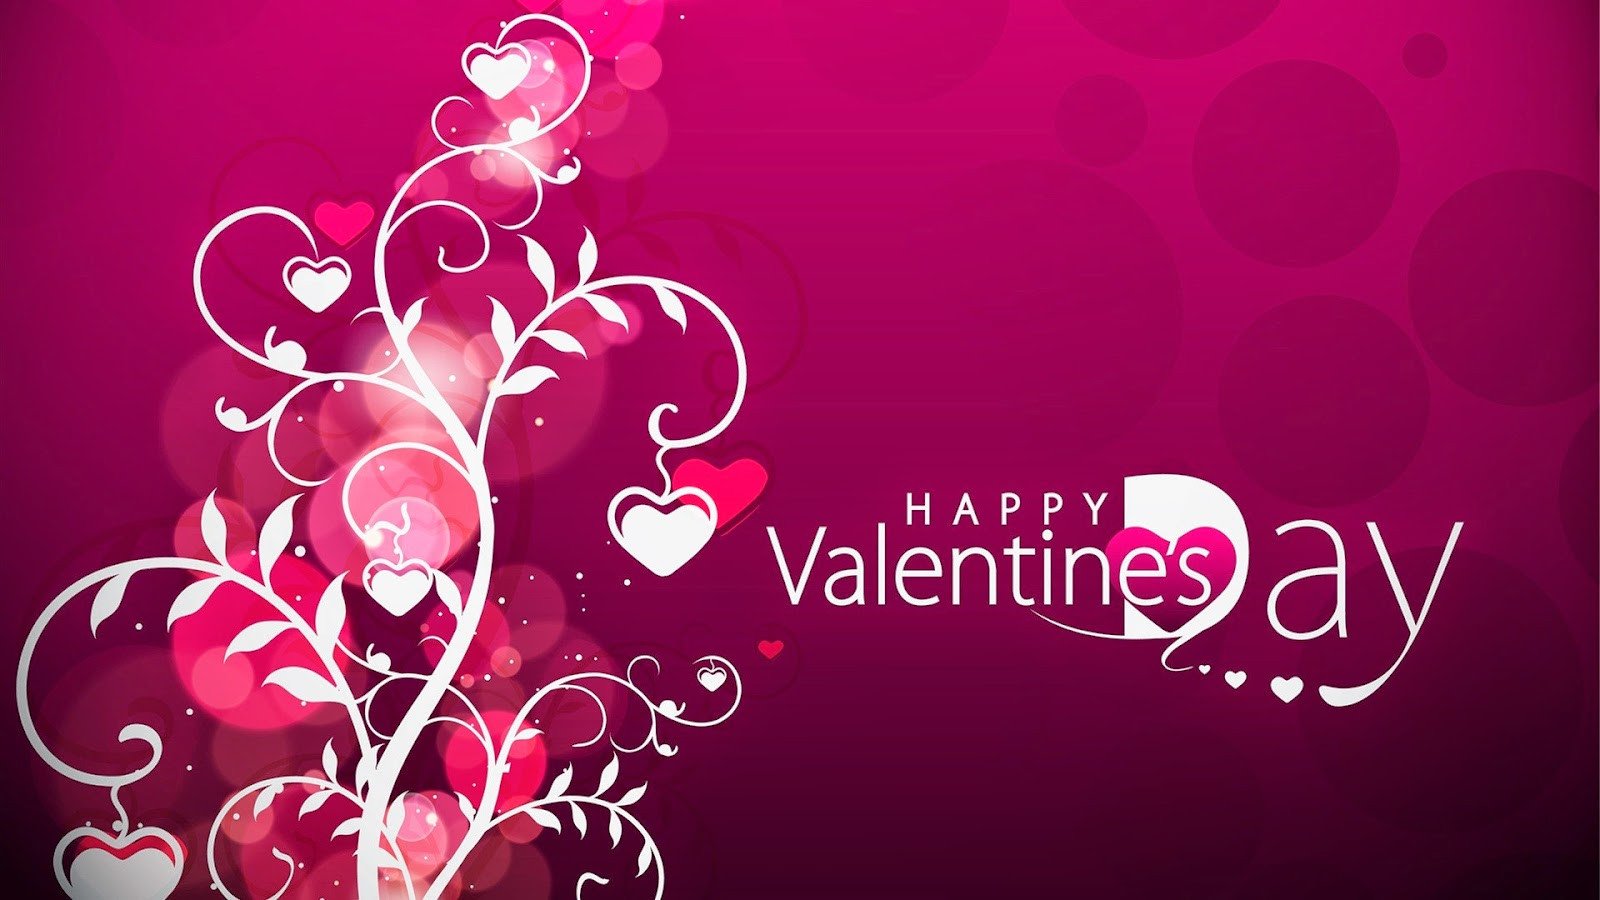 15 New Valentine s Day Desktop Wallpapers for 2015 Brand